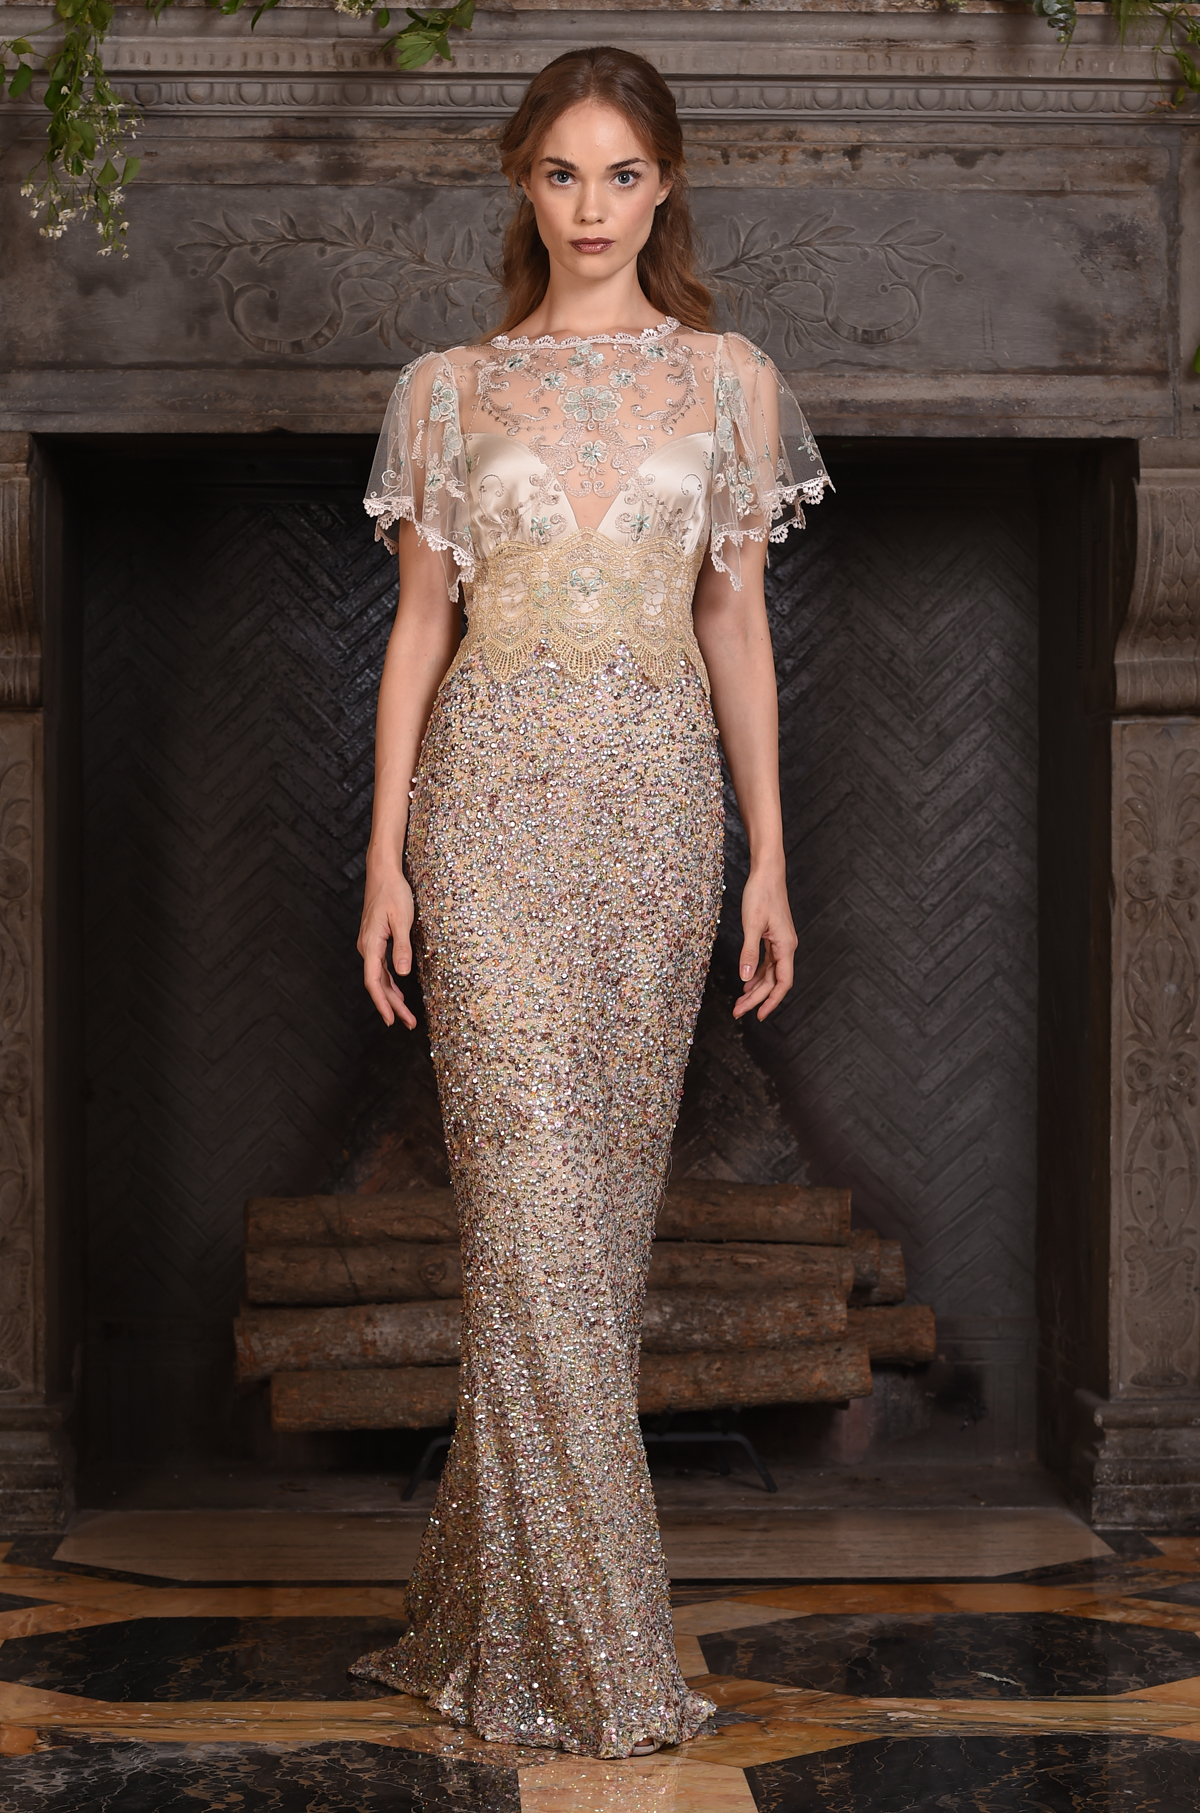 The Zodiac gown, from Claire Pettibone's 'The Four Seasons' bridal couture collection for 2017.